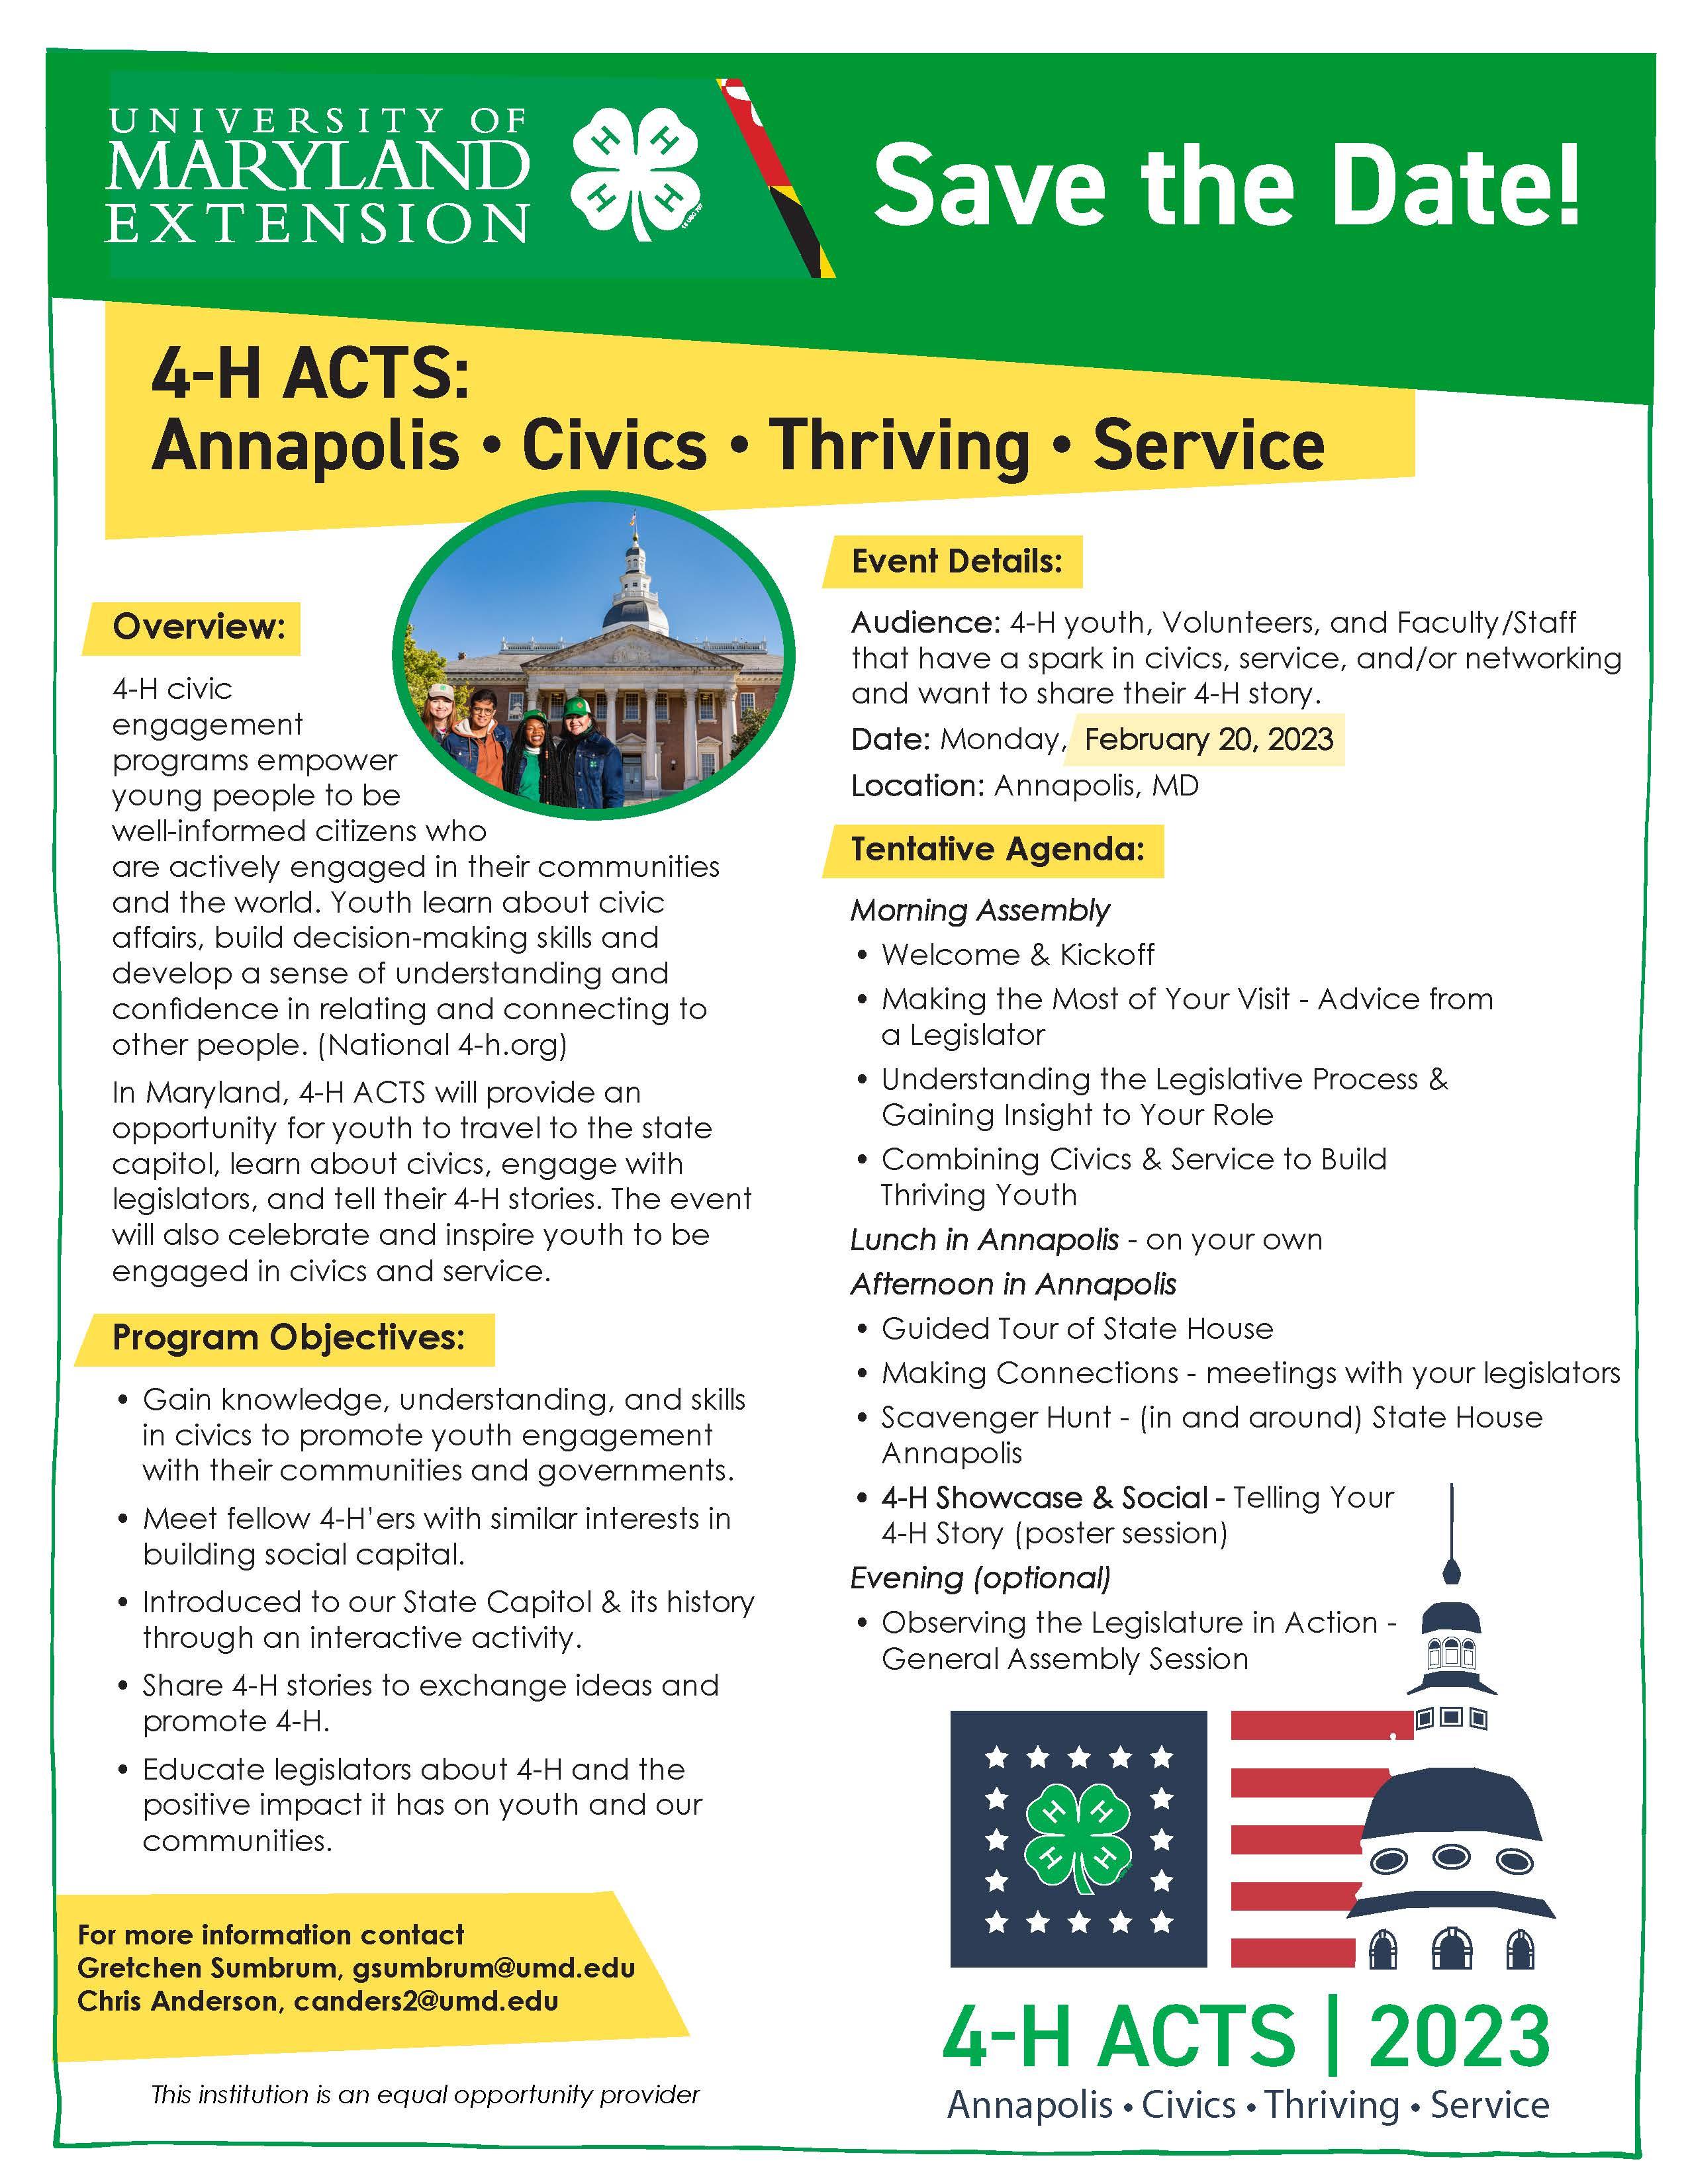 4-H ACTS